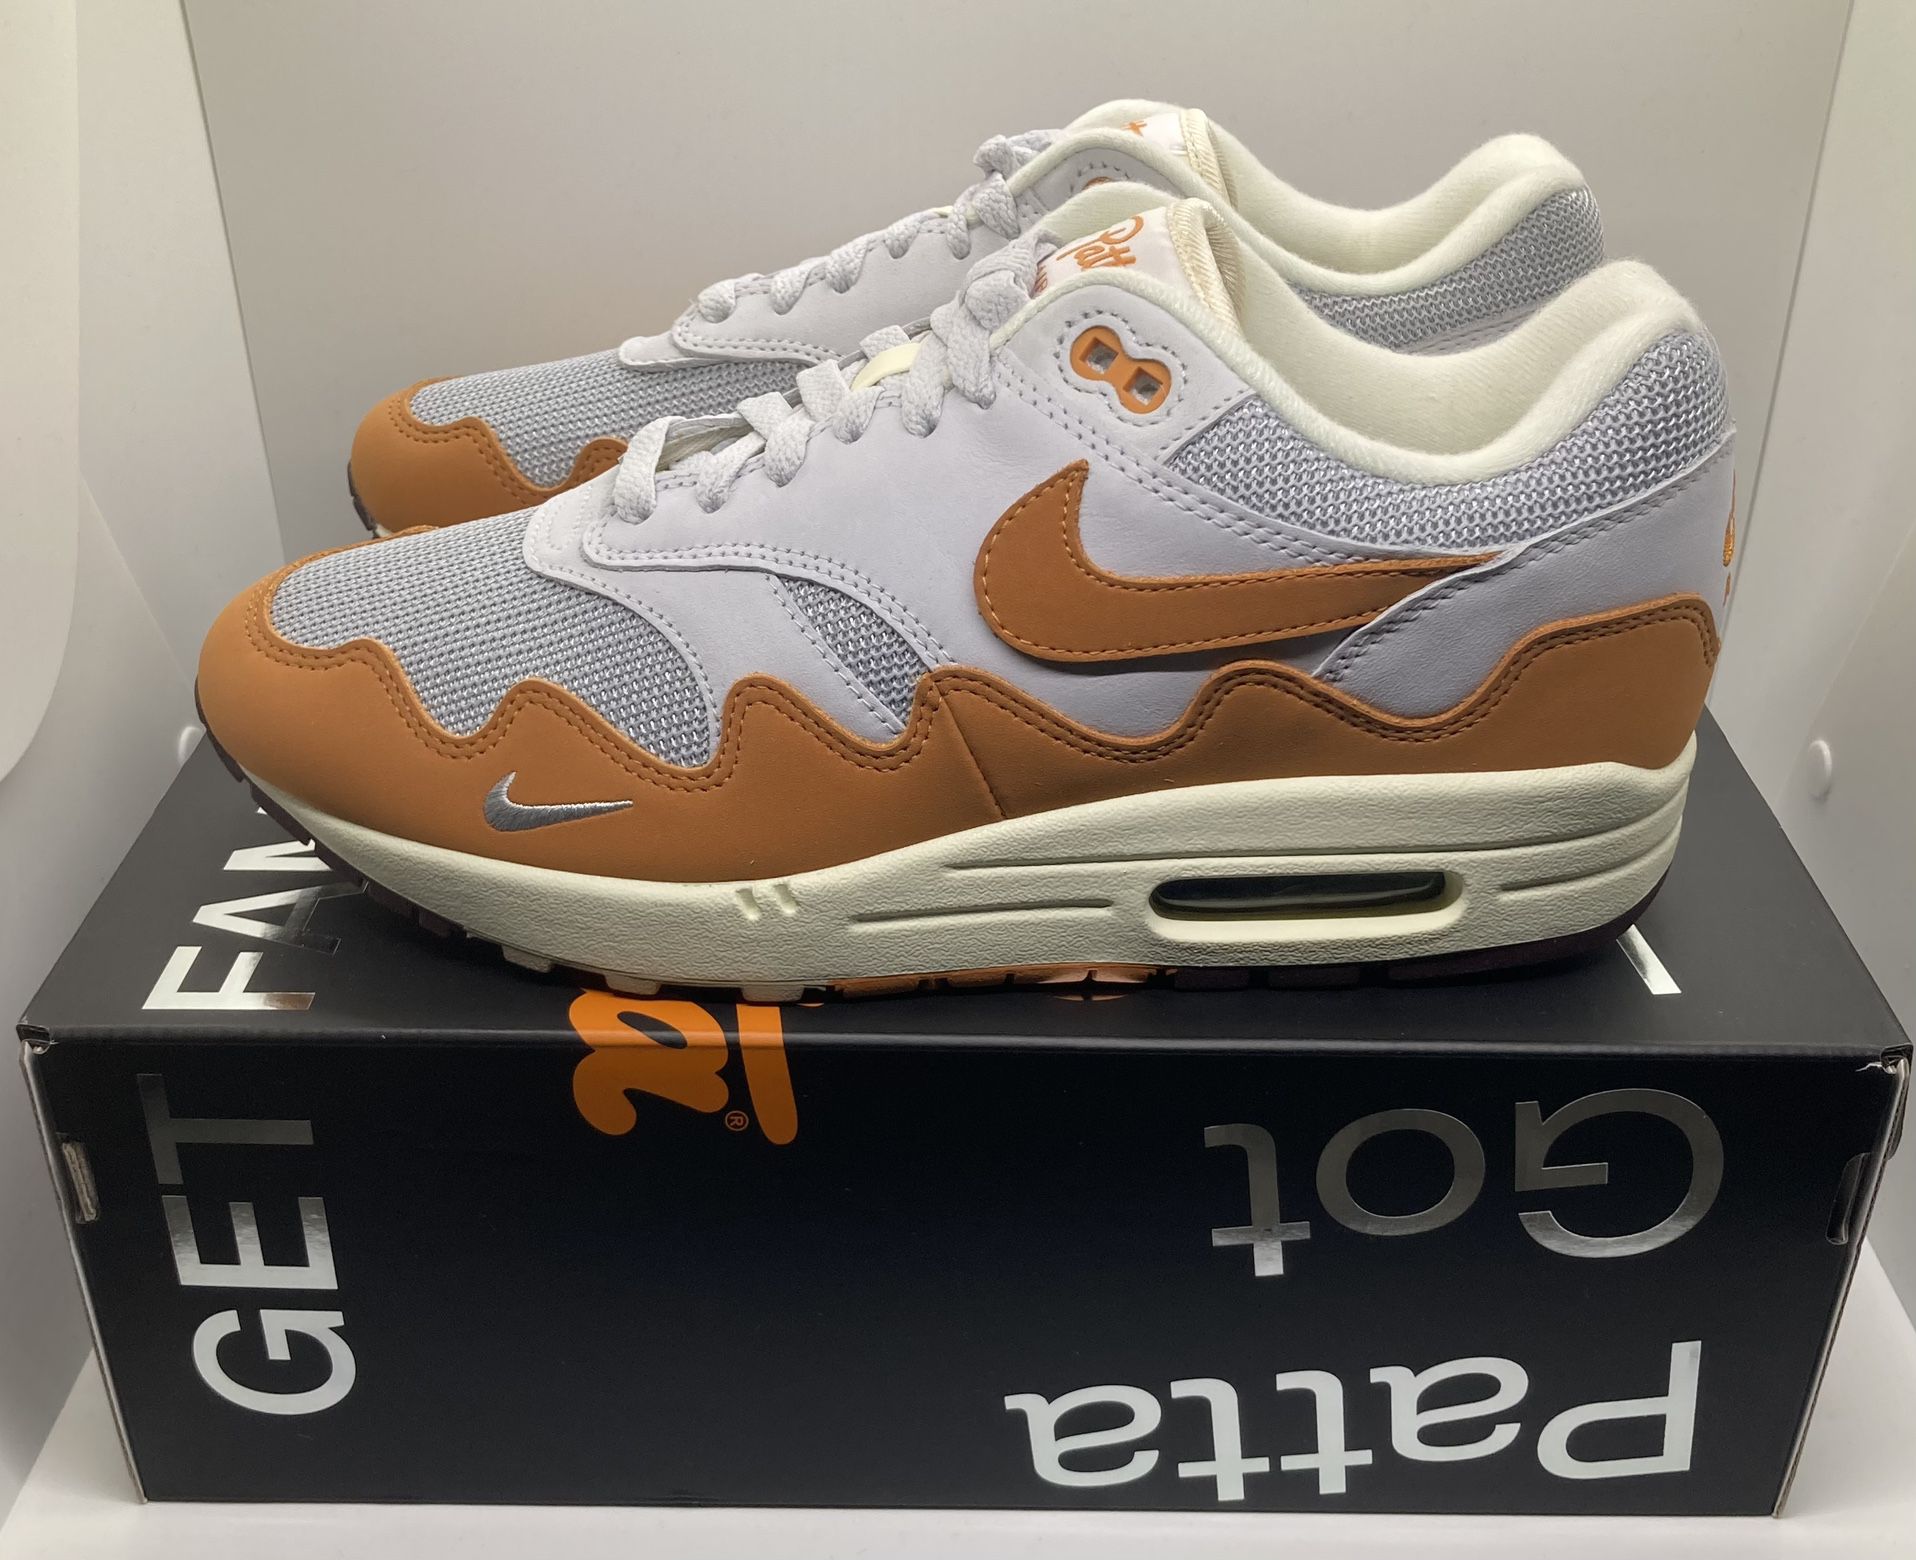 Nike Air Max 1 x Patta Waves Monarch (Special Box With Bracelet)